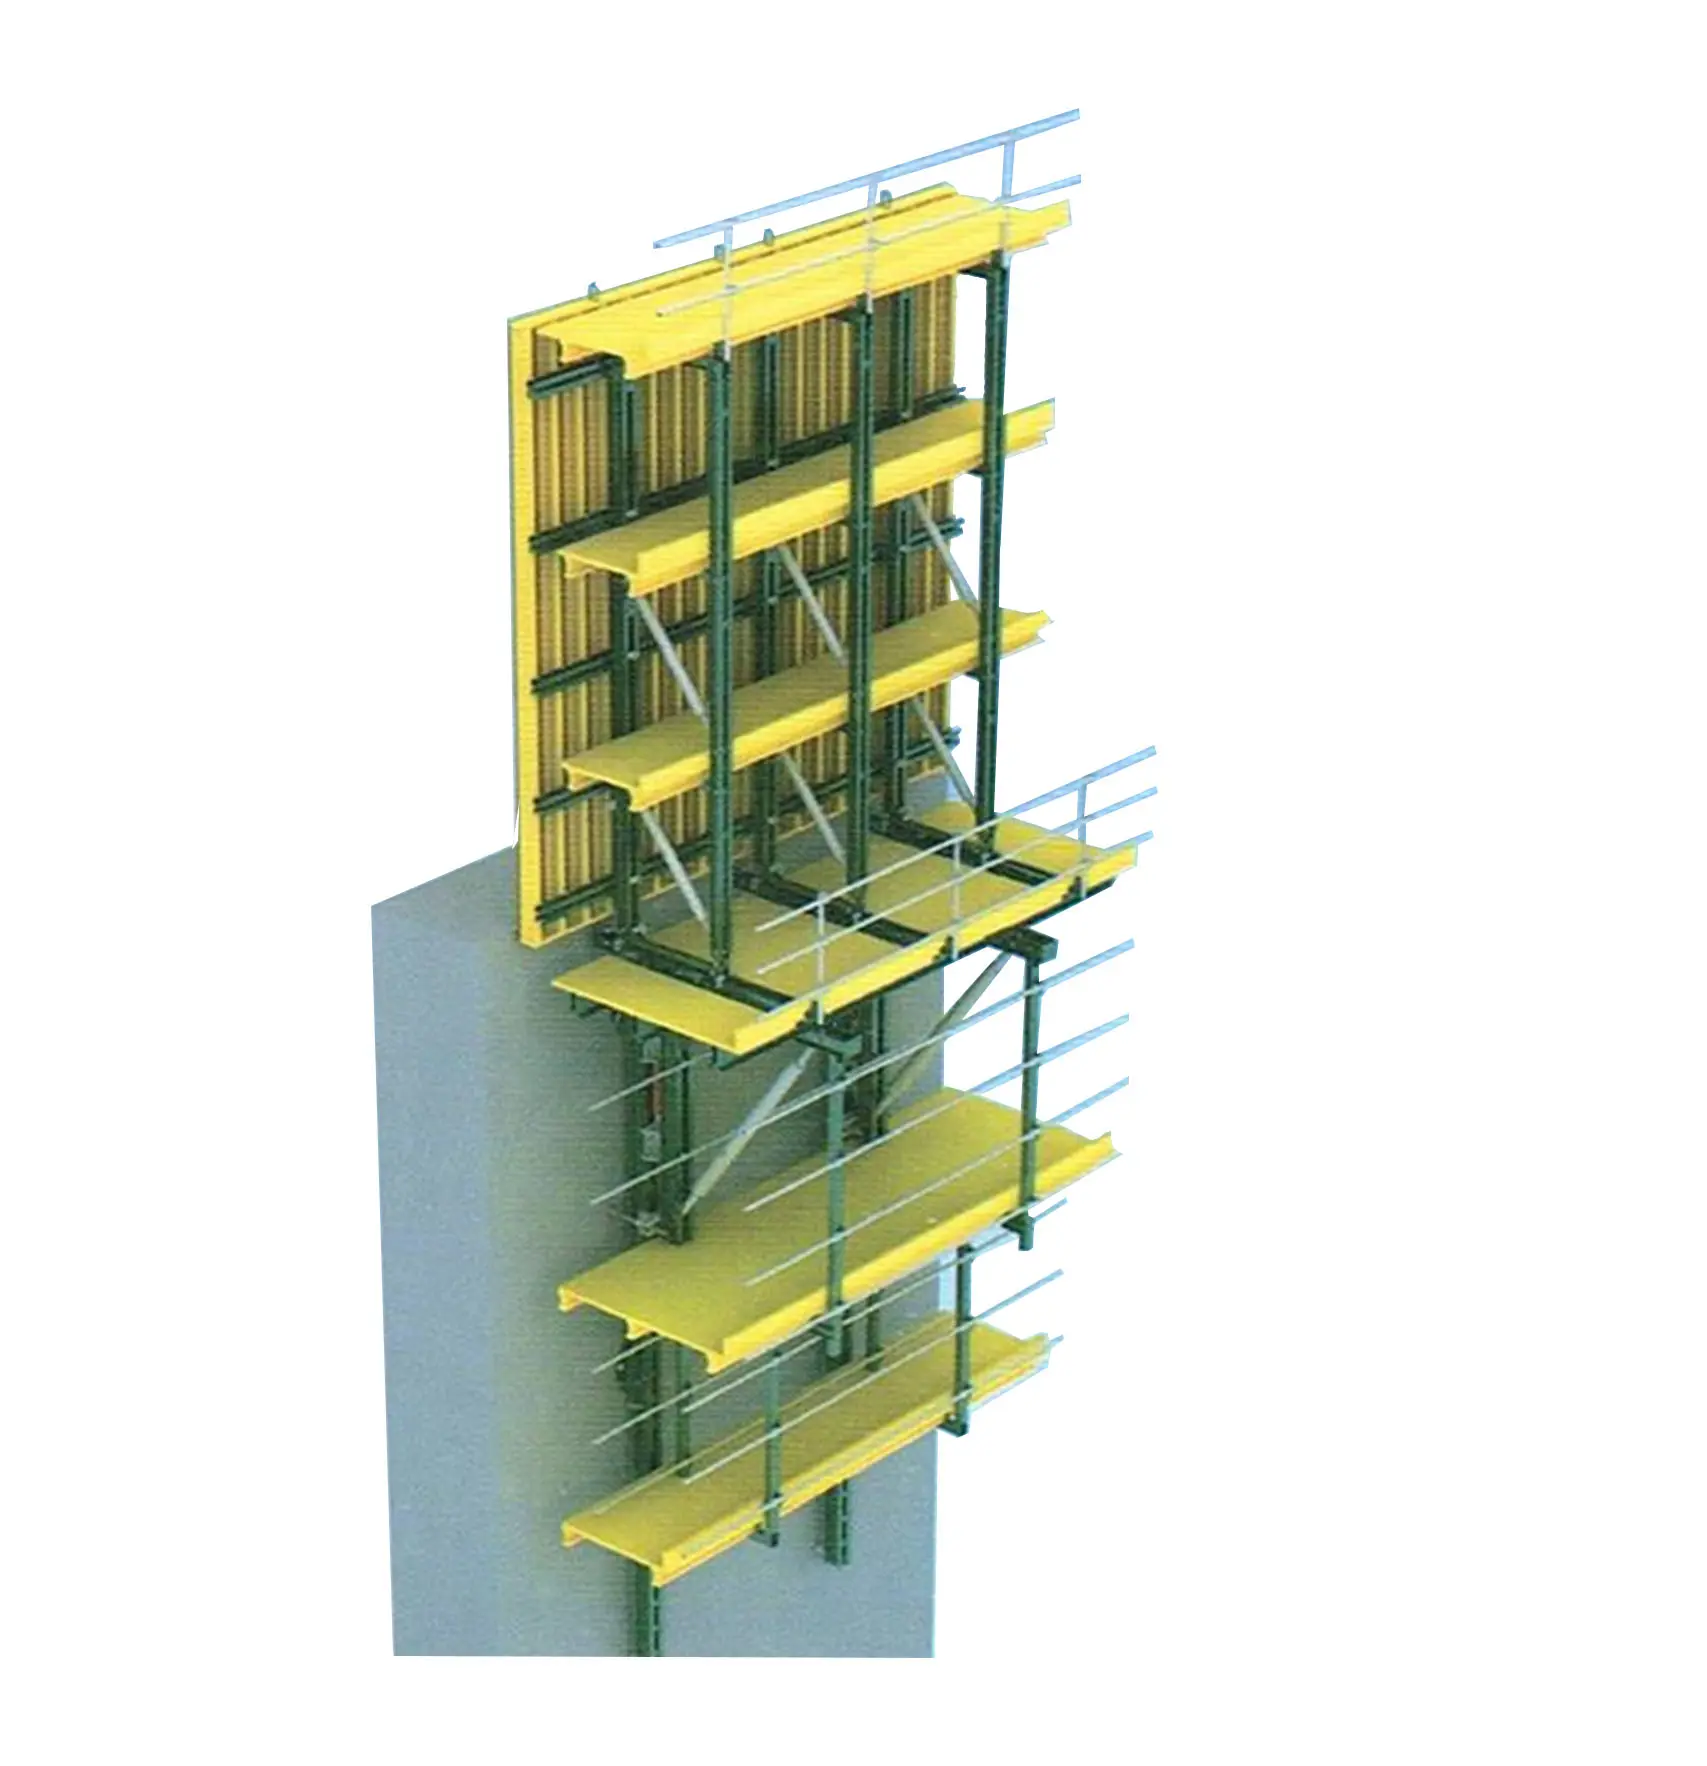 China Manufacturer Hydraulic Auto-Climbing Formwork System For Core wall